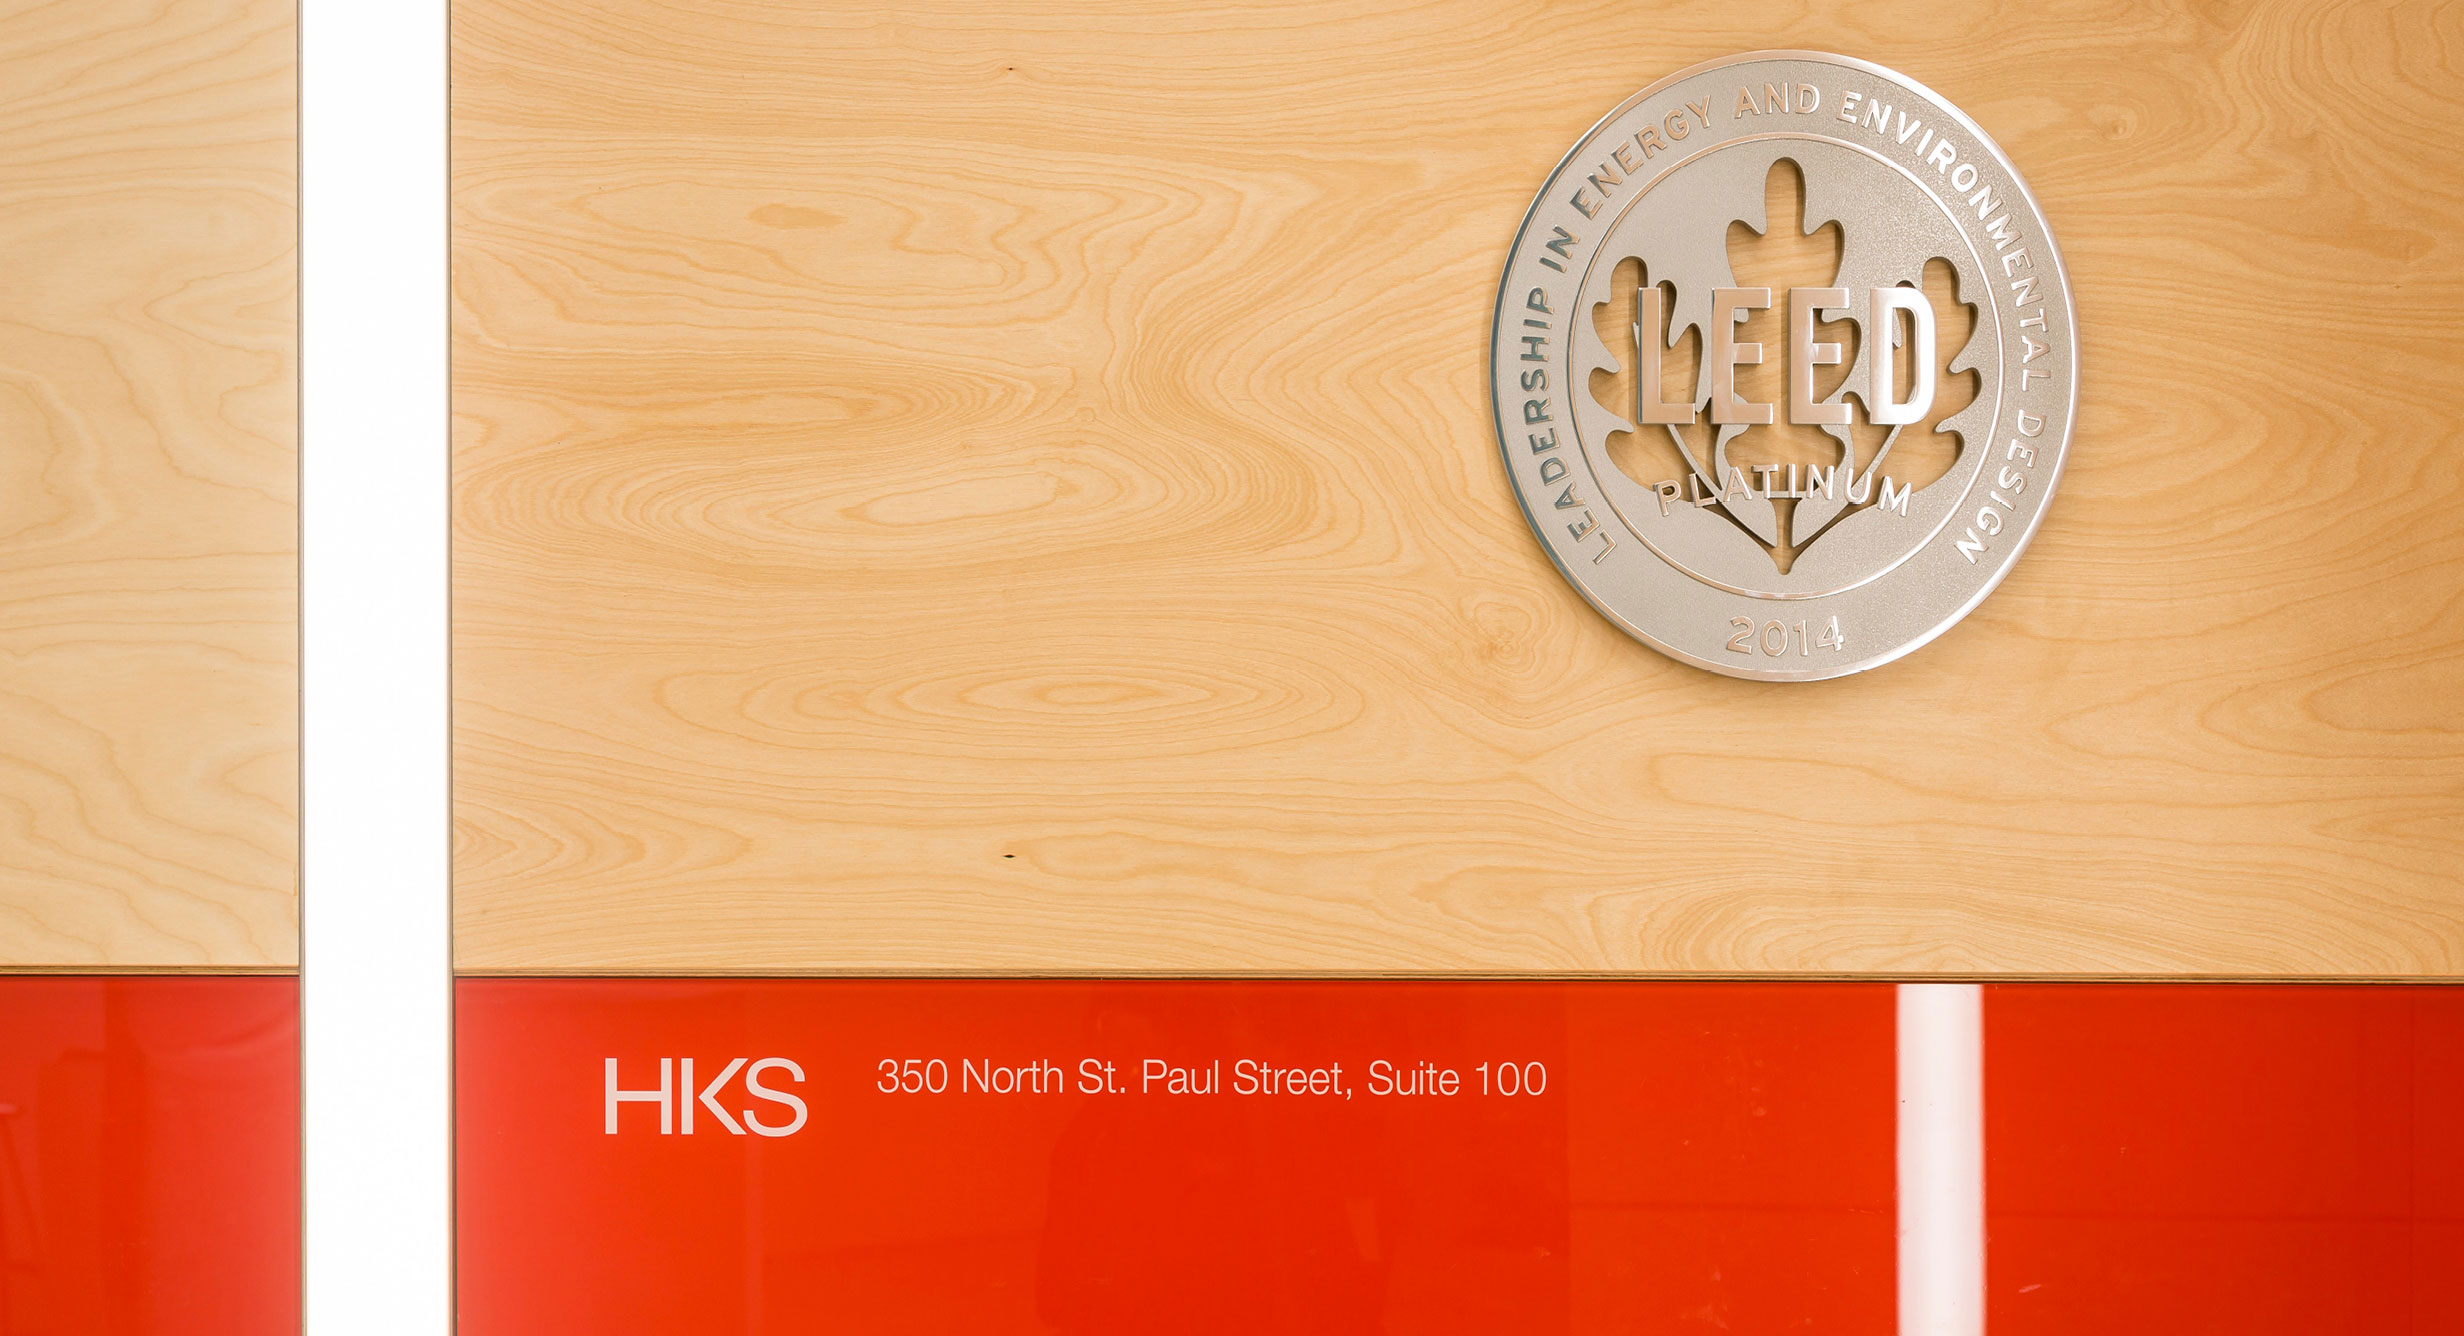 HKS Named LEED Proven Provider by Green Building Cerification Institute